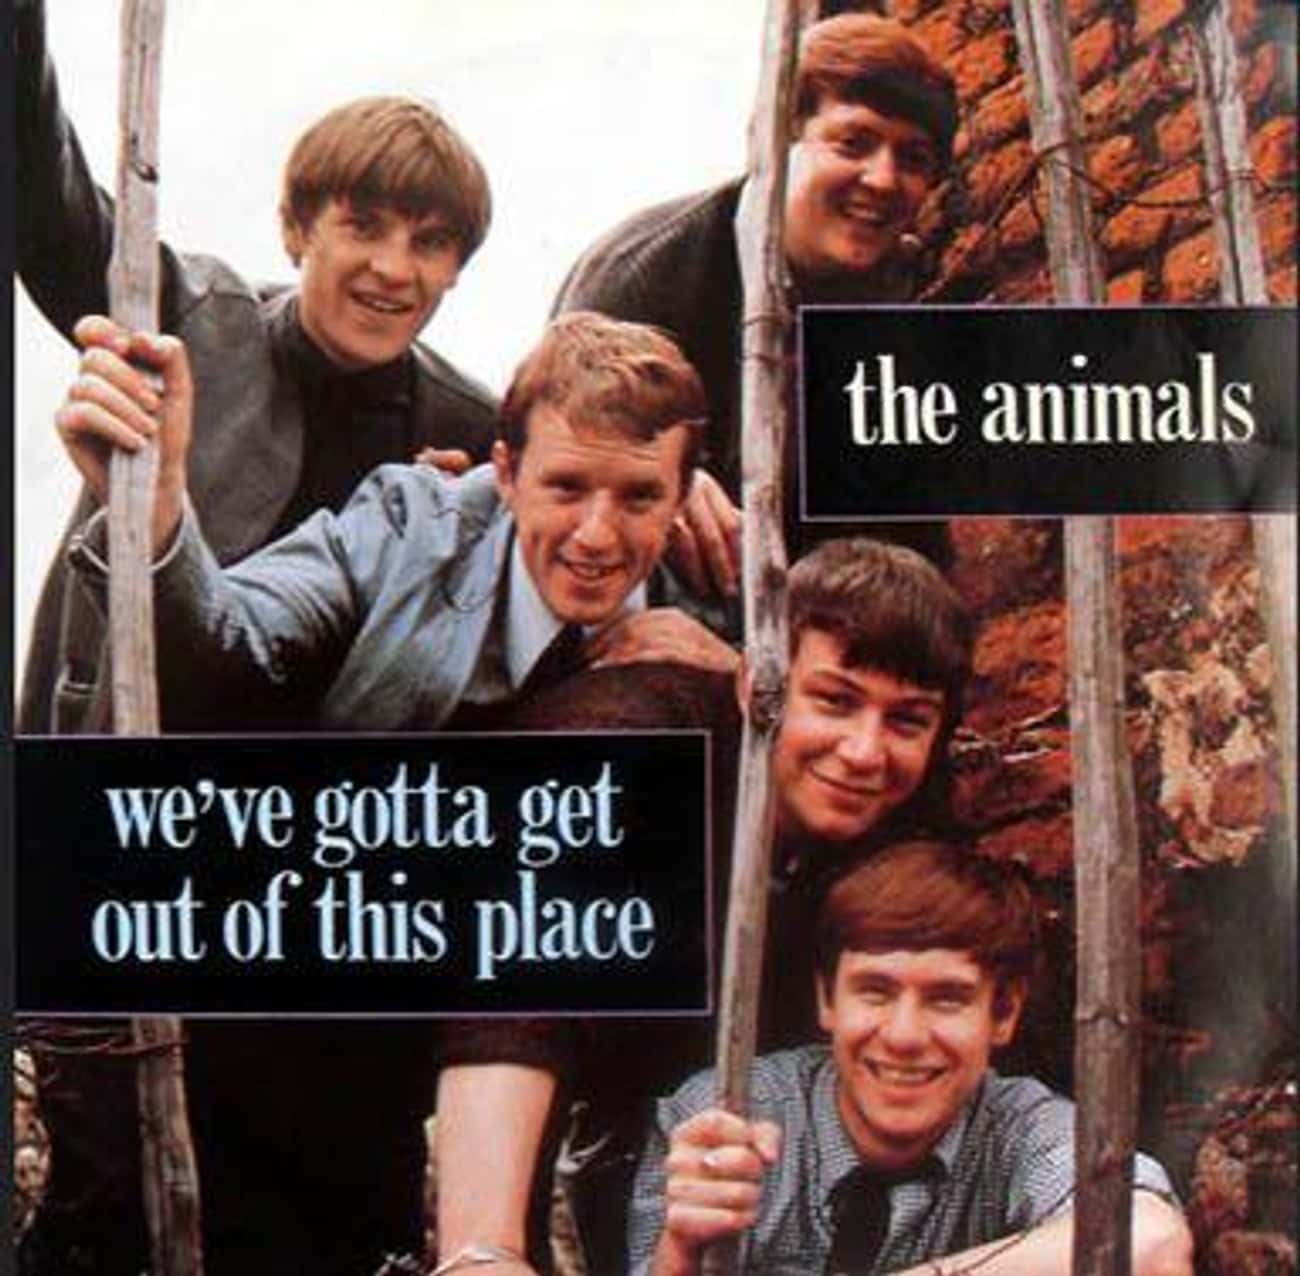 Out of this place. The animals. Animals we gotta get out of this place. We gotta get. The animals группа обложка.